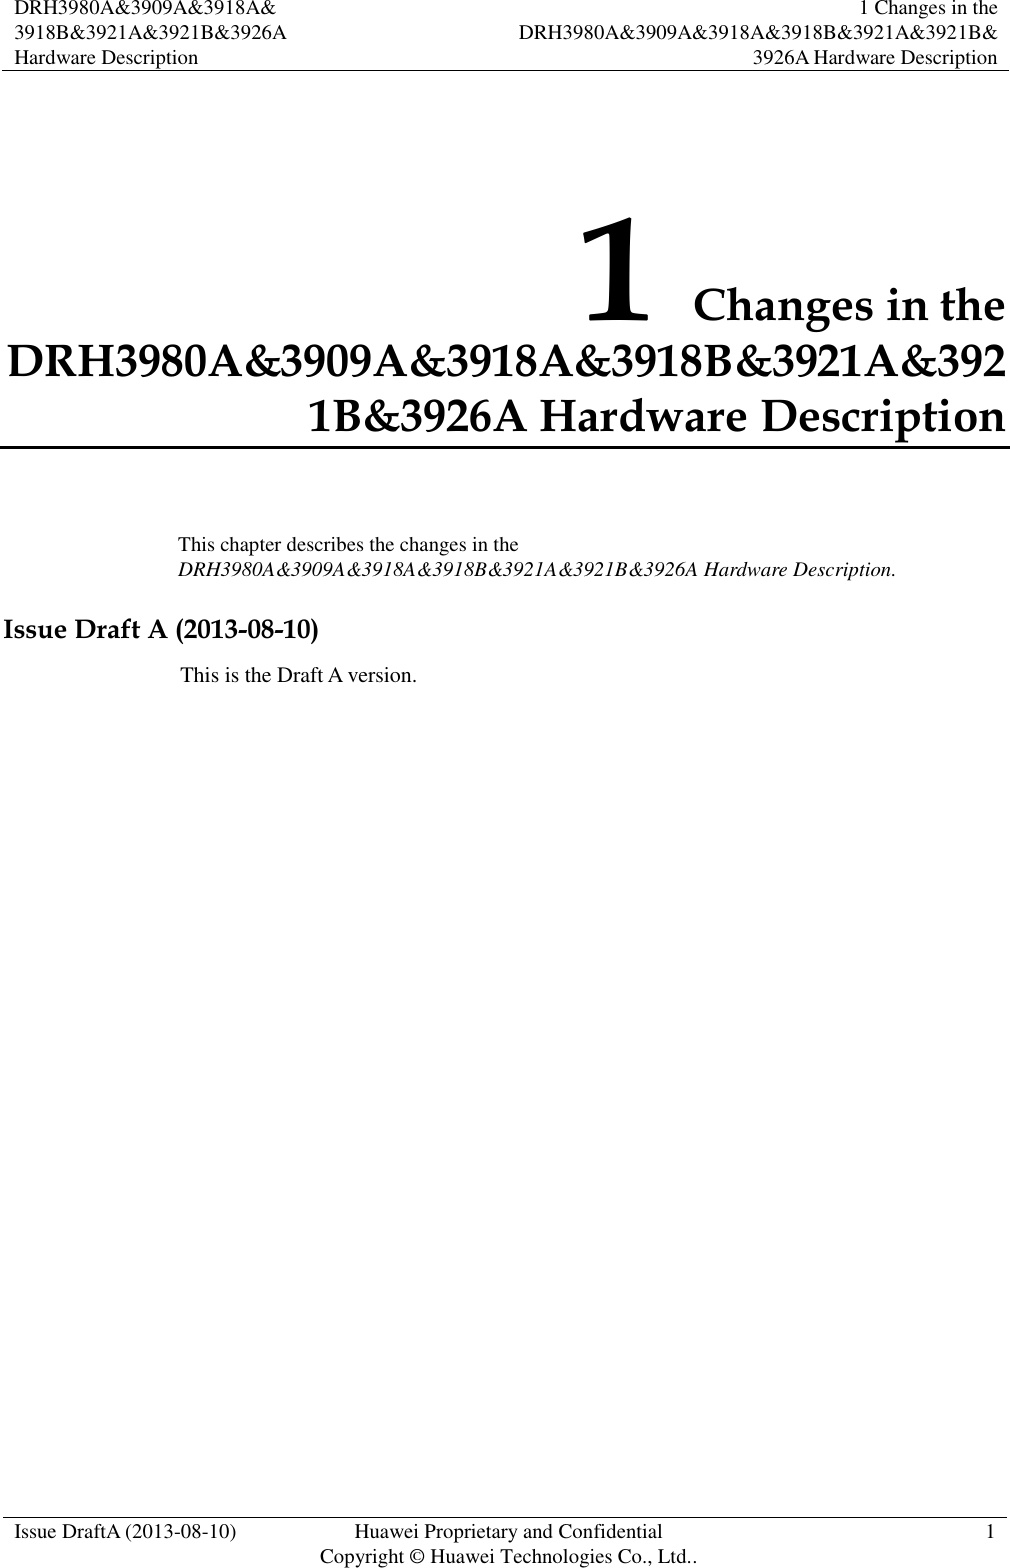  DRH3980A&amp;3909A&amp;3918A&amp; 3918B&amp;3921A&amp;3921B&amp;3926A Hardware Description 1 Changes in the DRH3980A&amp;3909A&amp;3918A&amp;3918B&amp;3921A&amp;3921B&amp;3926A Hardware Description  Issue DraftA (2013-08-10) Huawei Proprietary and Confidential                                     Copyright © Huawei Technologies Co., Ltd.. 1    1 Changes in the DRH3980A&amp;3909A&amp;3918A&amp;3918B&amp;3921A&amp;3921B&amp;3926A Hardware Description This chapter describes the changes in the DRH3980A&amp;3909A&amp;3918A&amp;3918B&amp;3921A&amp;3921B&amp;3926A Hardware Description. Issue Draft A (2013-08-10) This is the Draft A version.             